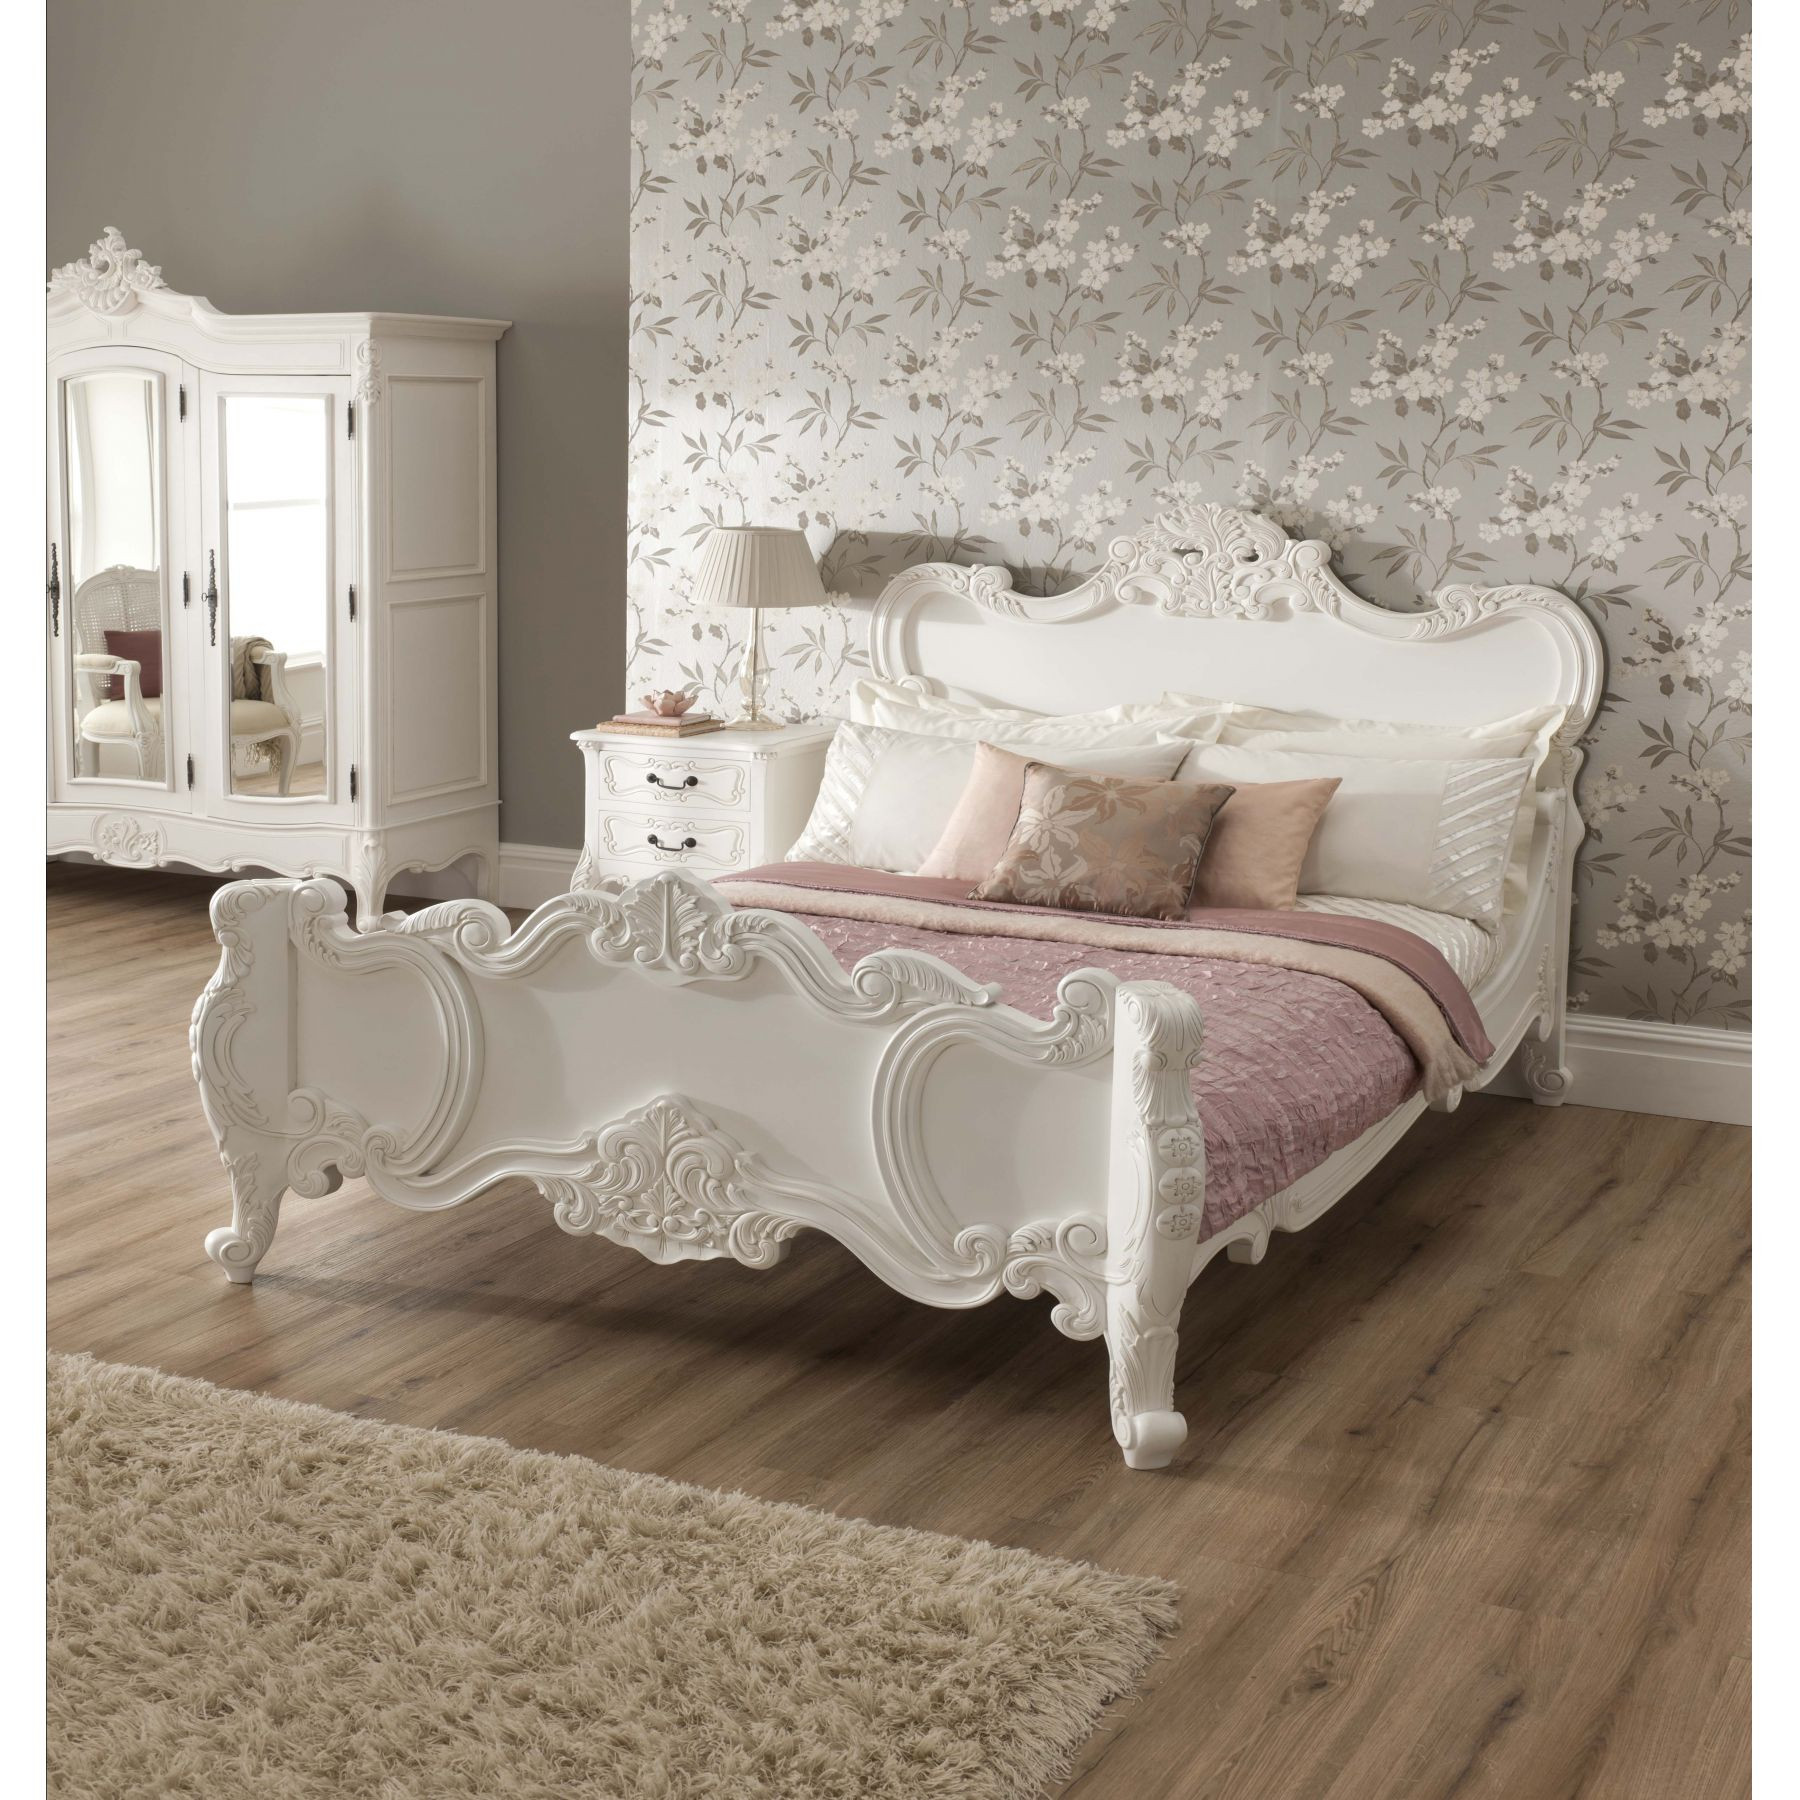 Shabby Chic Bedroom Chair
 Vintage Your Room with 9 Shabby Chic Bedroom Furniture